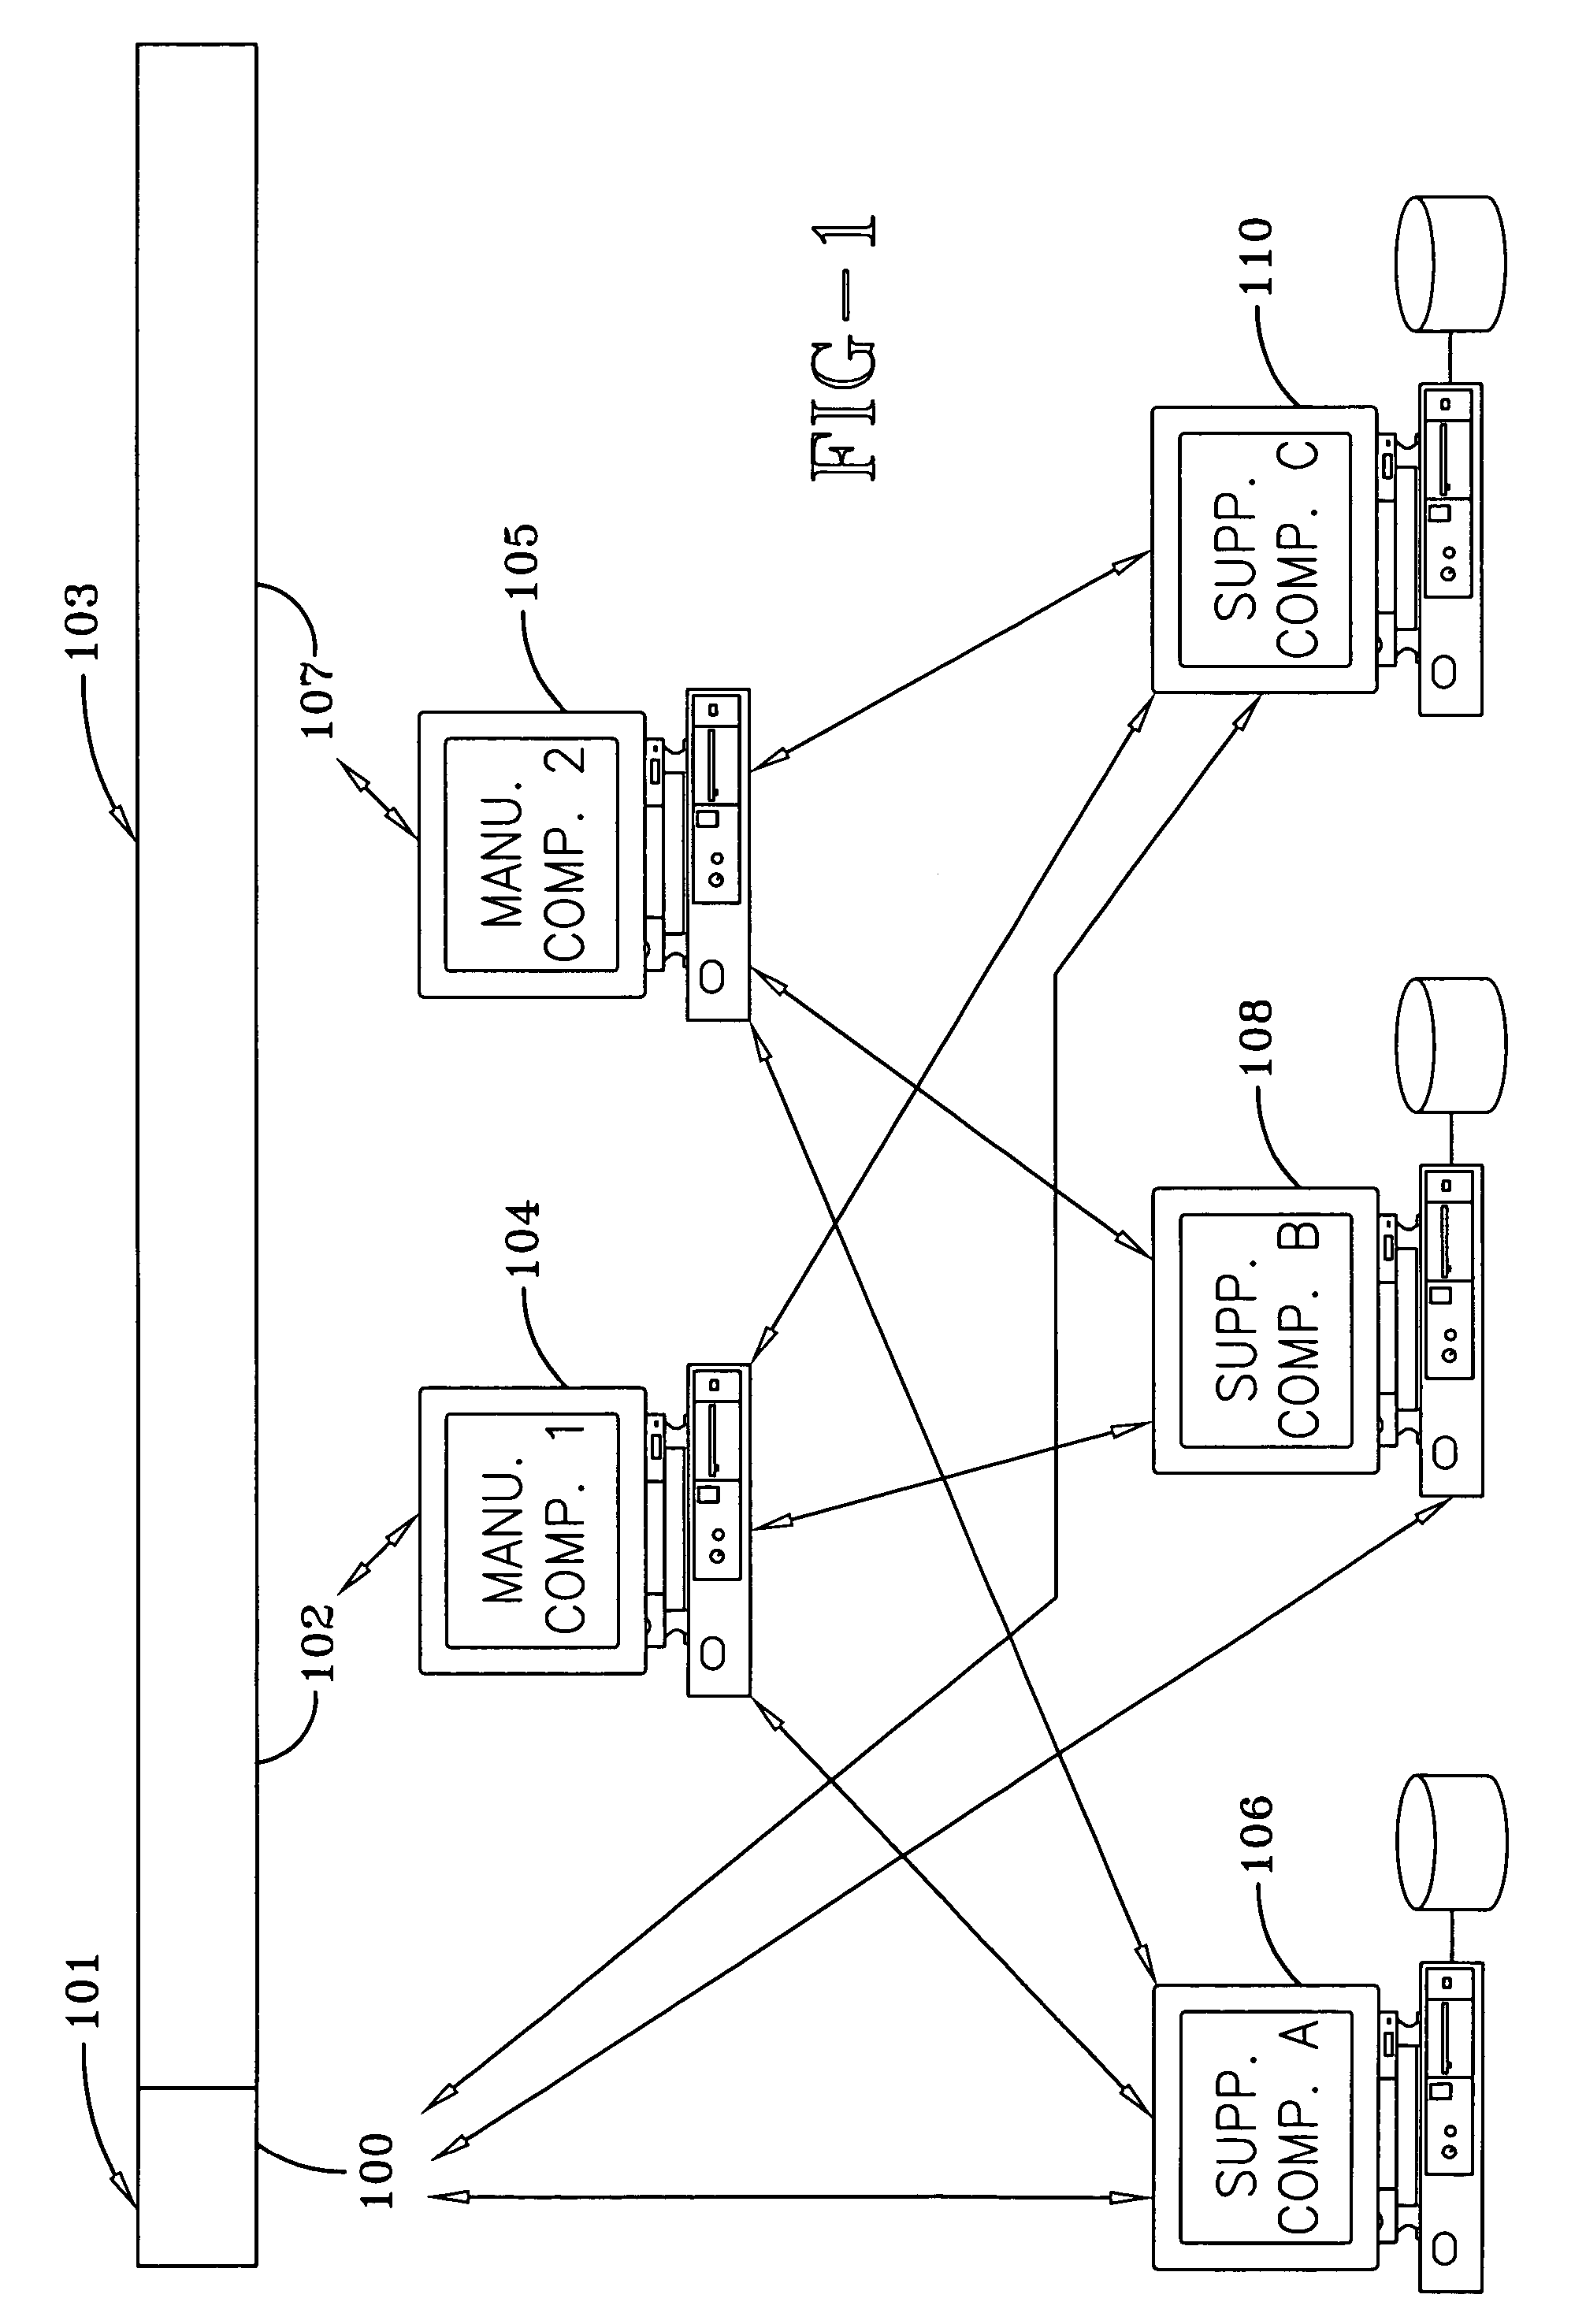 Supplier synchronization system and method